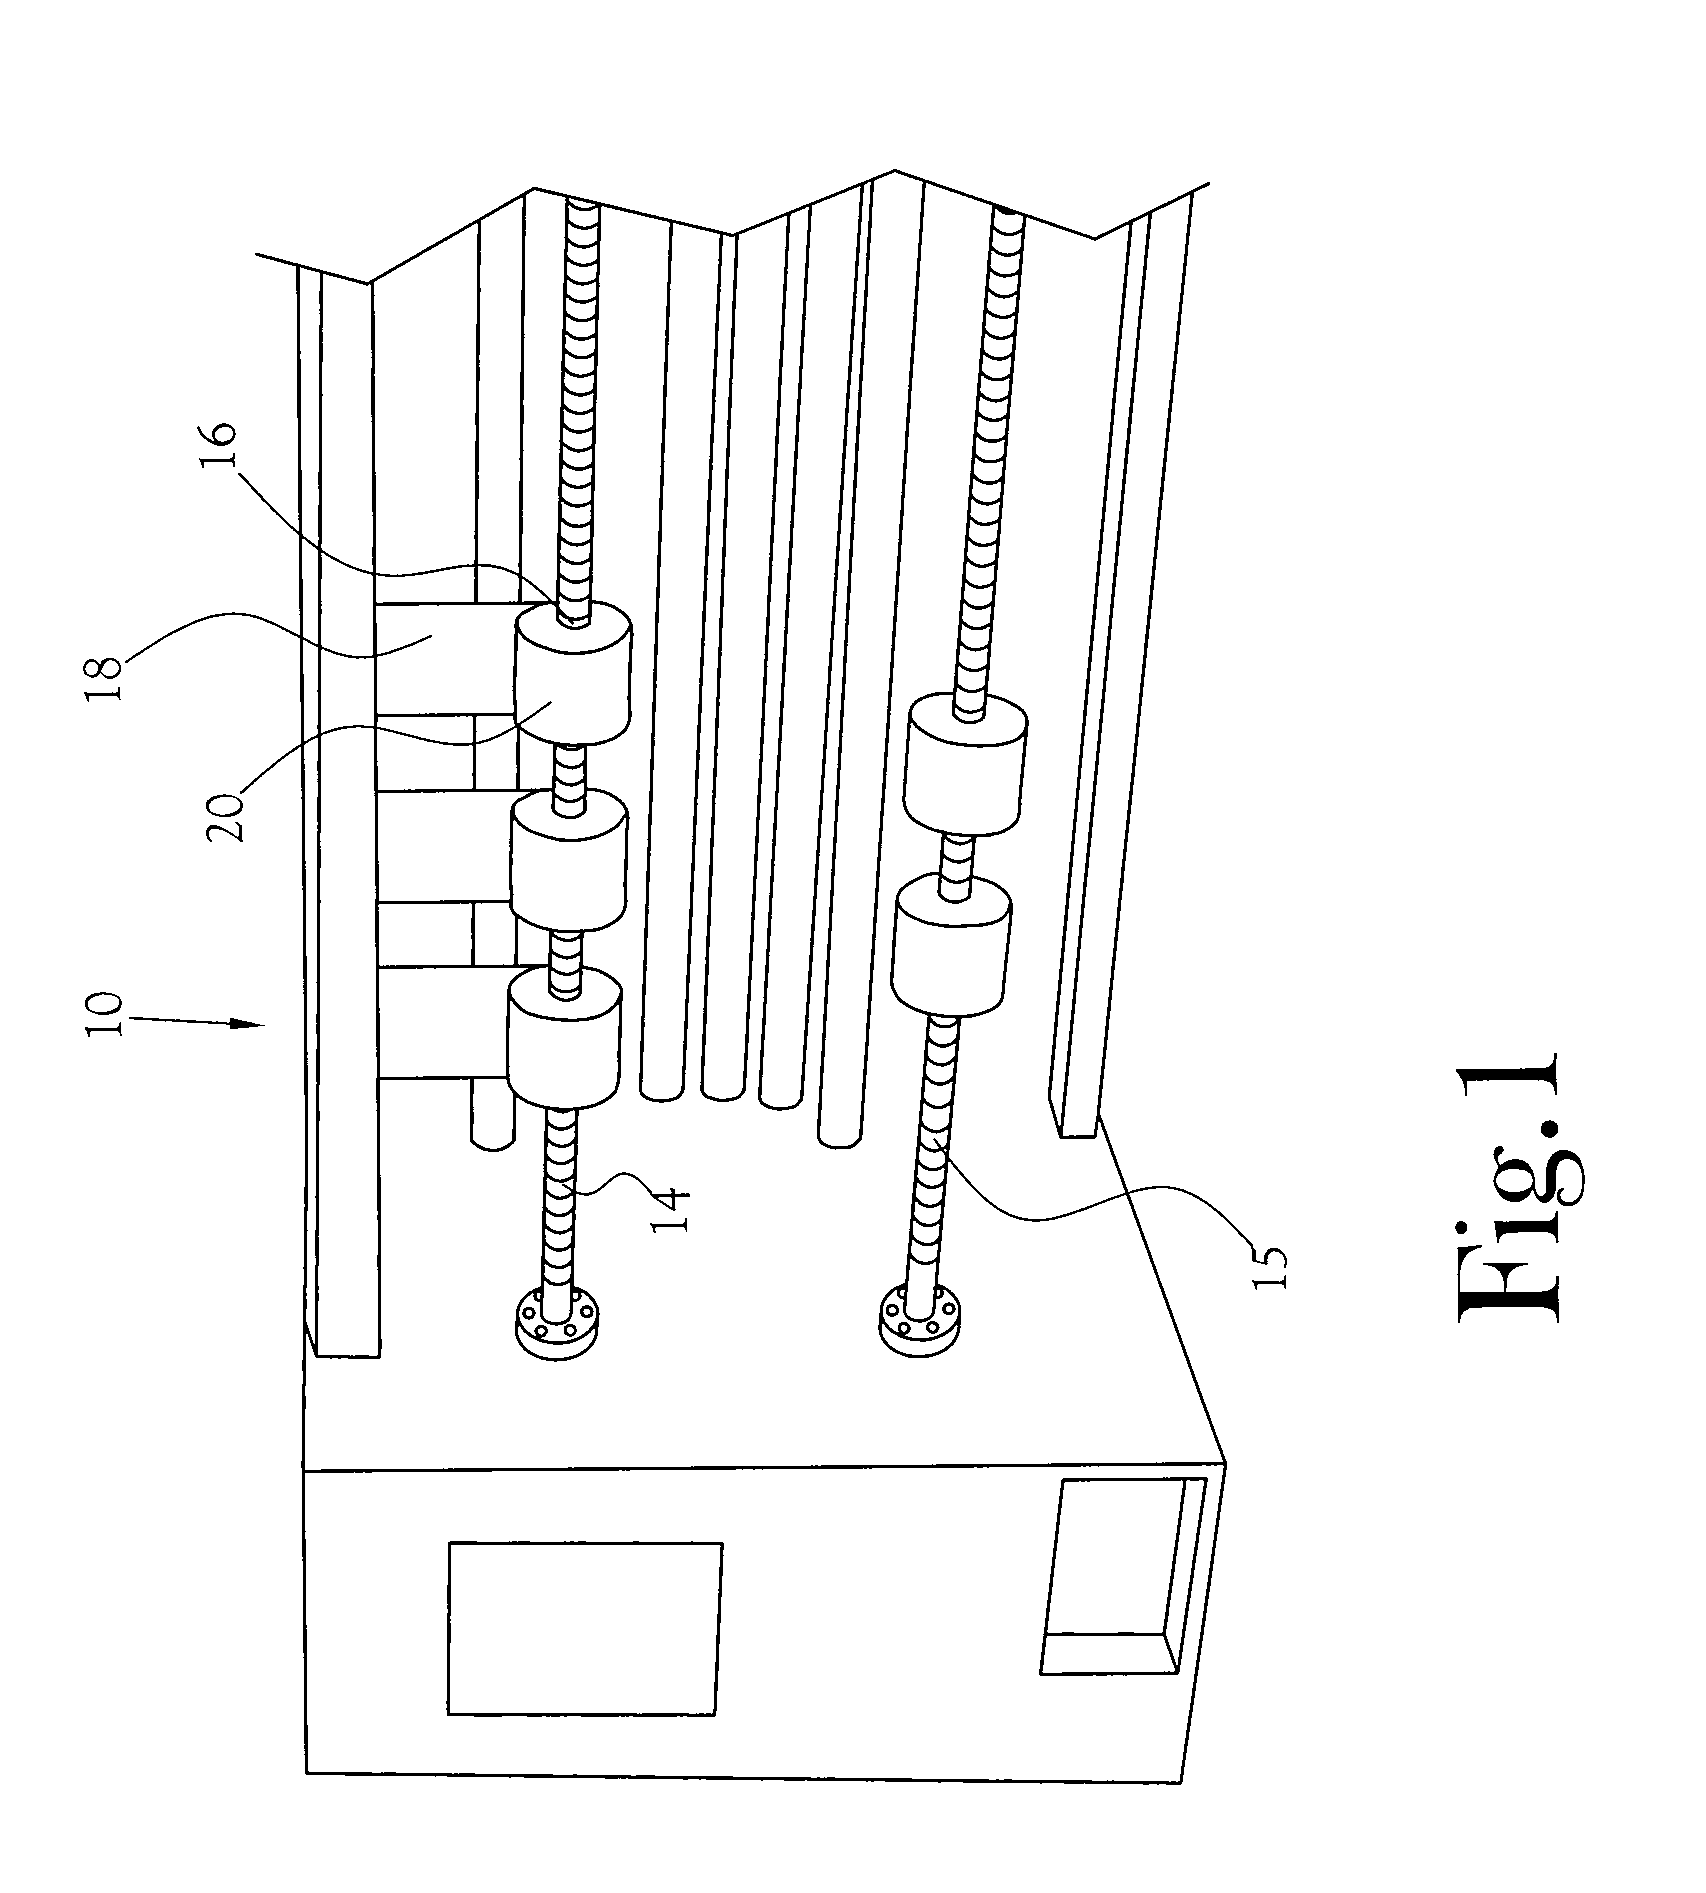 Method And Apparatus For Carrying Out Maintenance Of Web Handling Shafts